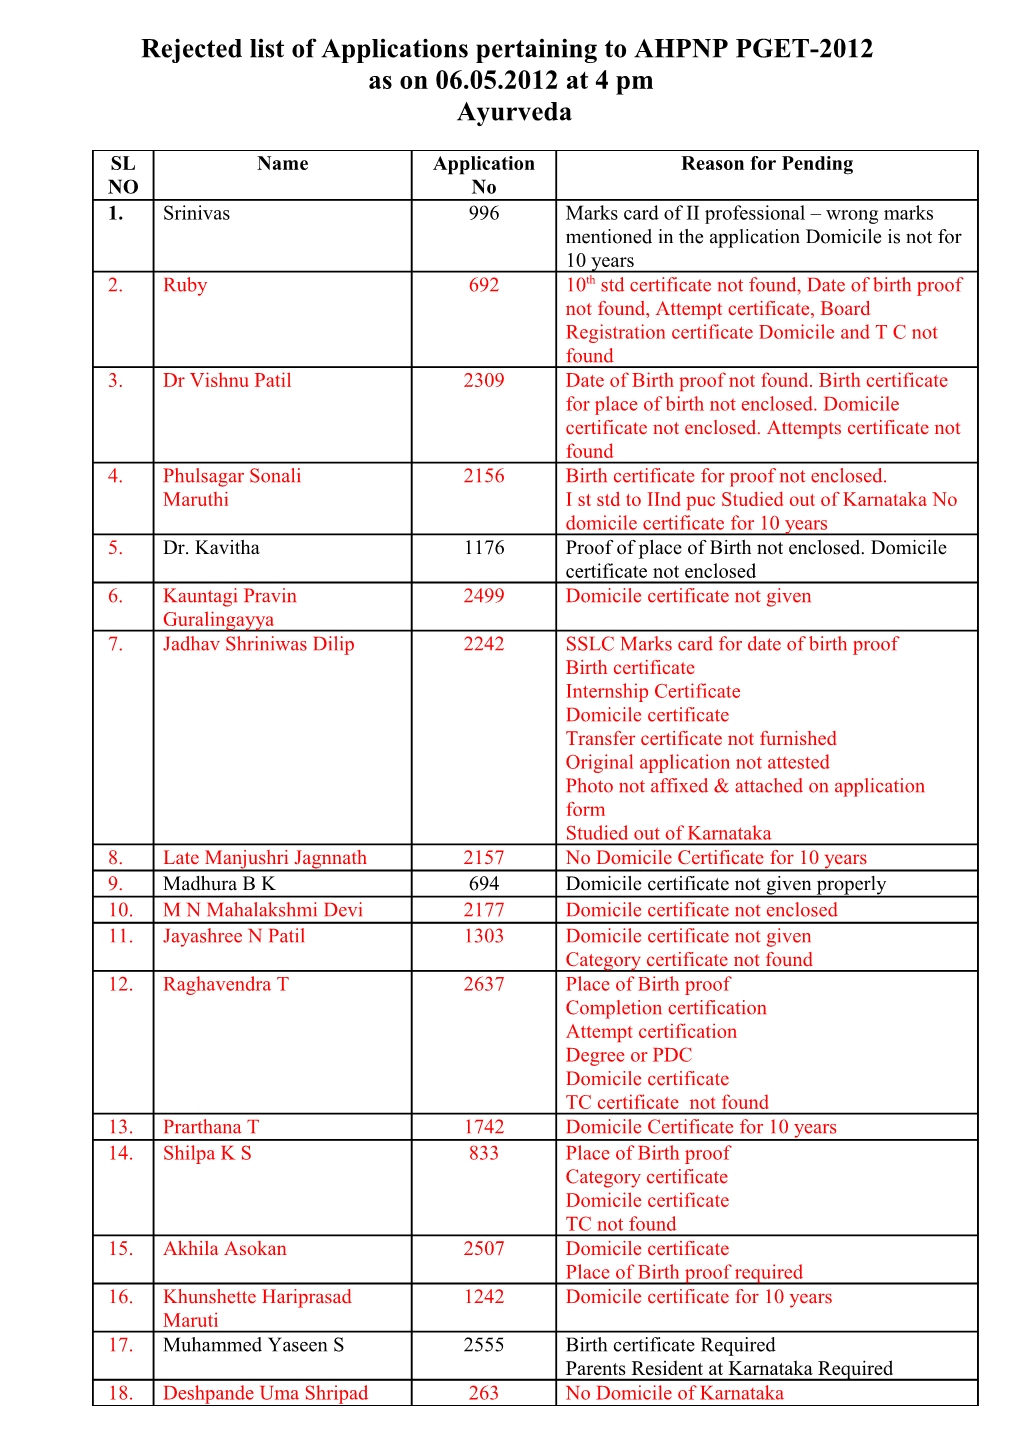 Pending List of Applications Pertaining to AHPNP Pget-2012